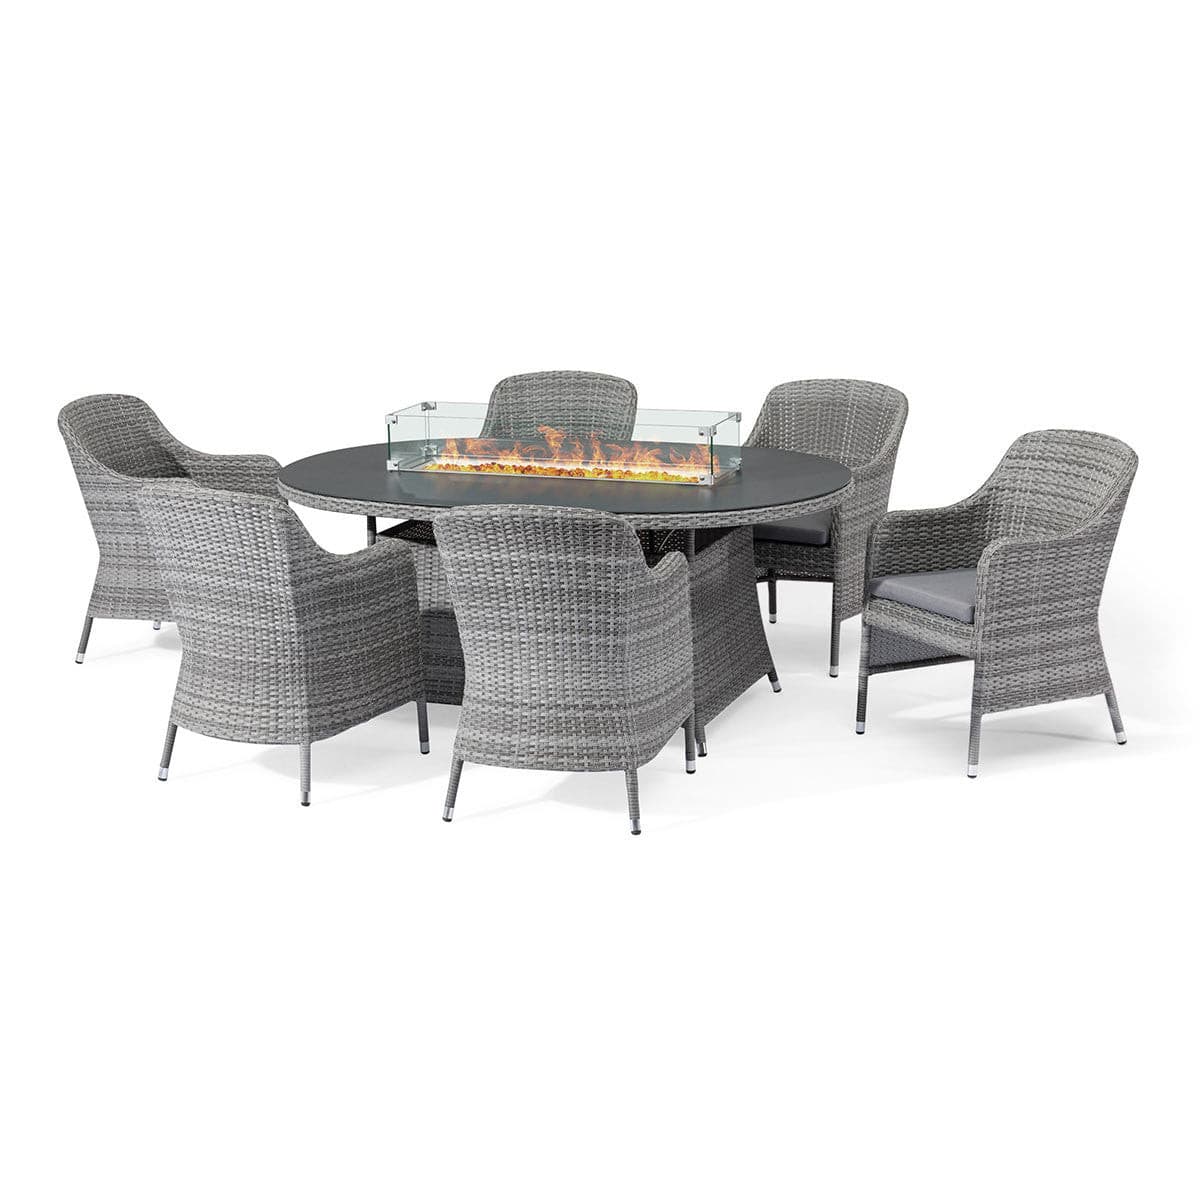 Santorini 6 Seat Oval Fire Pit Dining Set - Vookoo Lifestyle